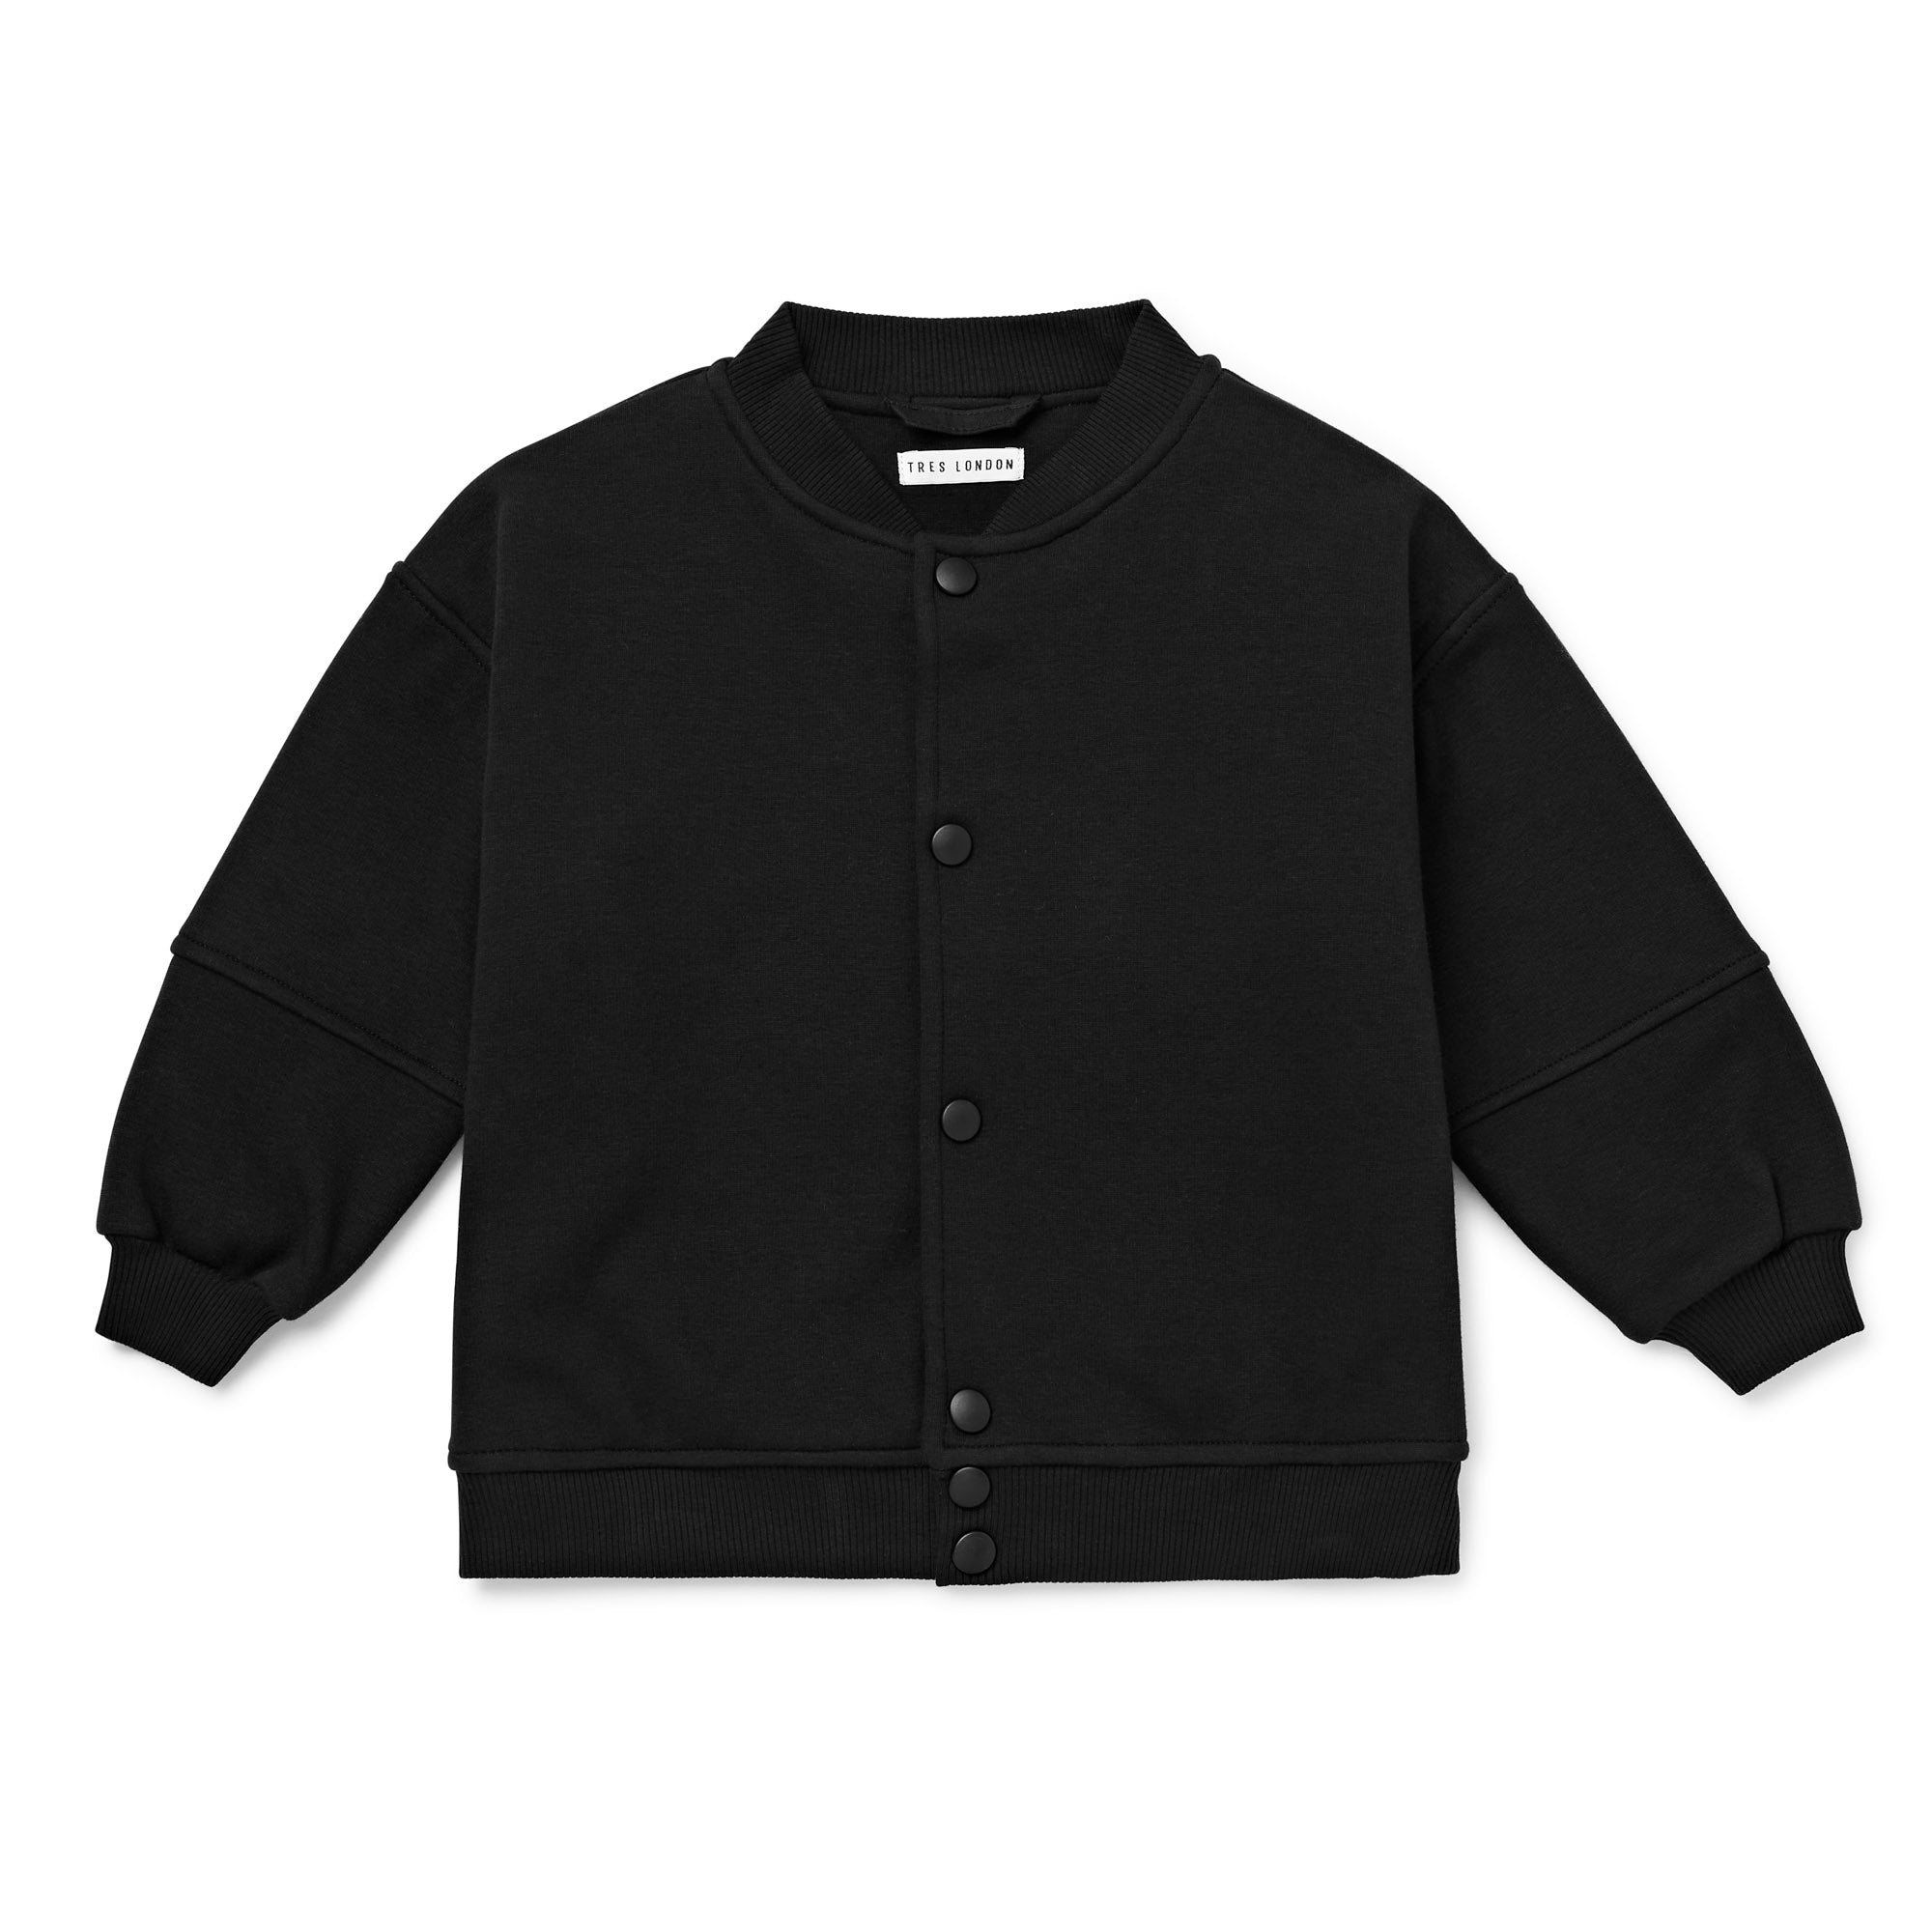 Front view of bomber jacket, in a black plush cotton blend.